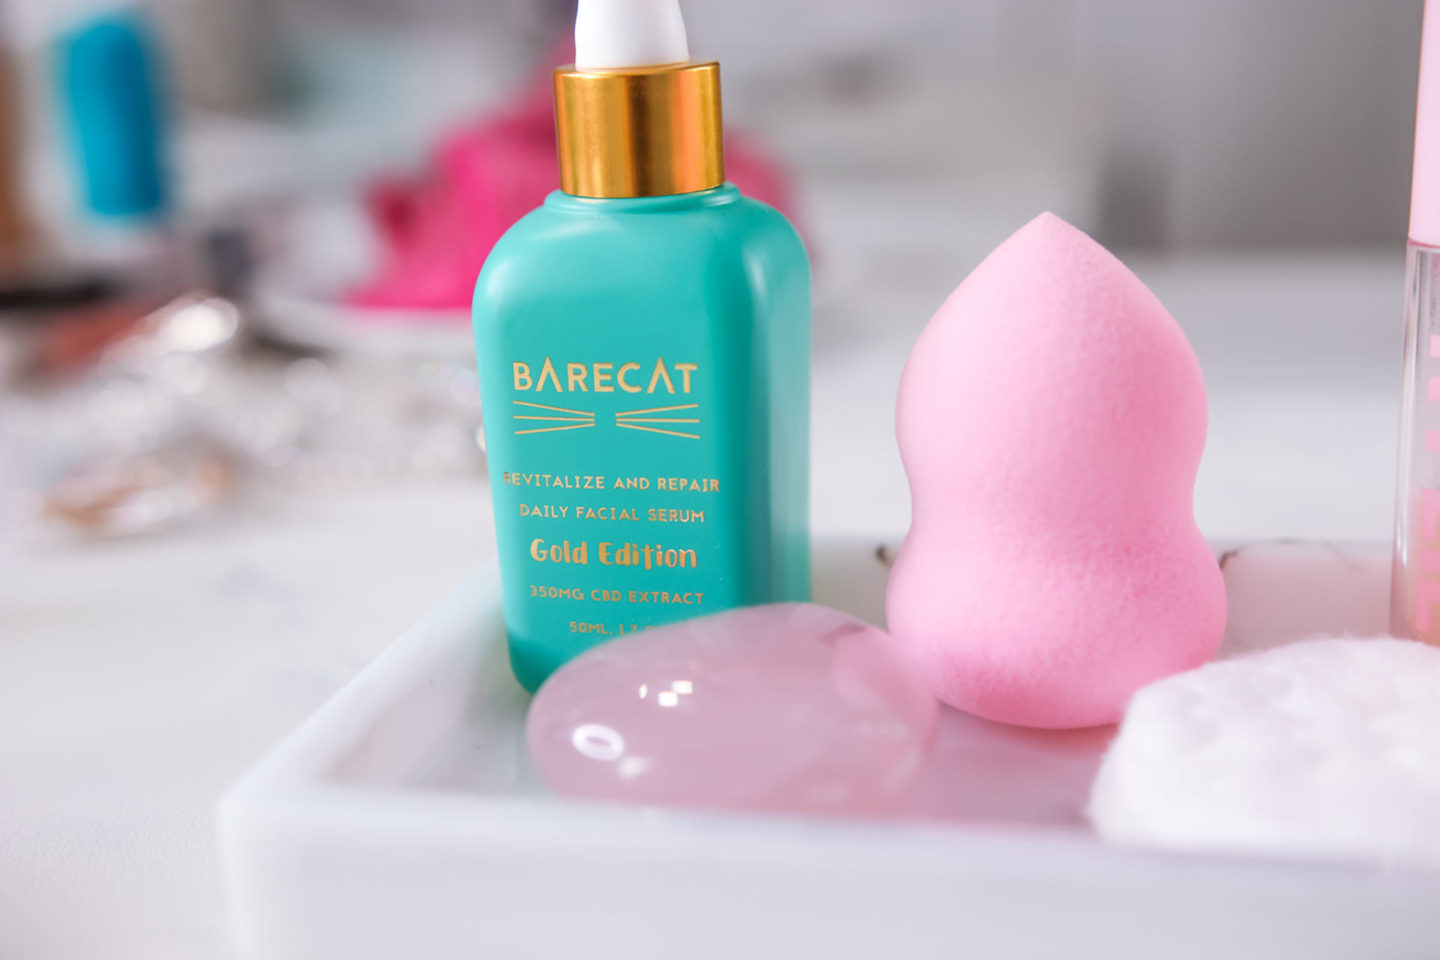 Beauty Pick of the Month: Barecat 3 in 1 Facial Serum